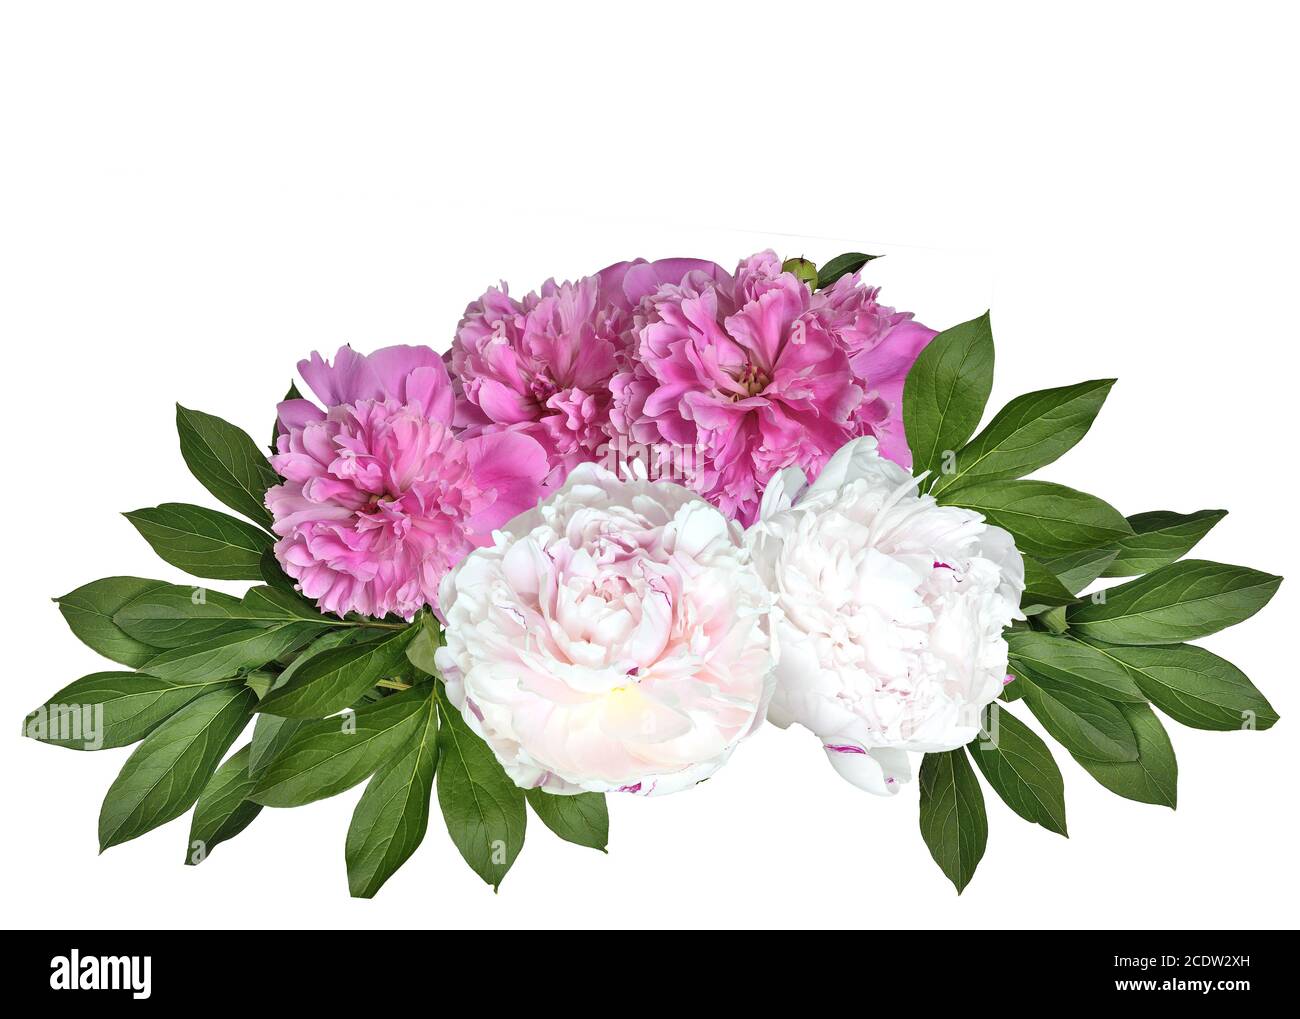 Pink and white peonies bouquet isolated on a white background Stock Photo